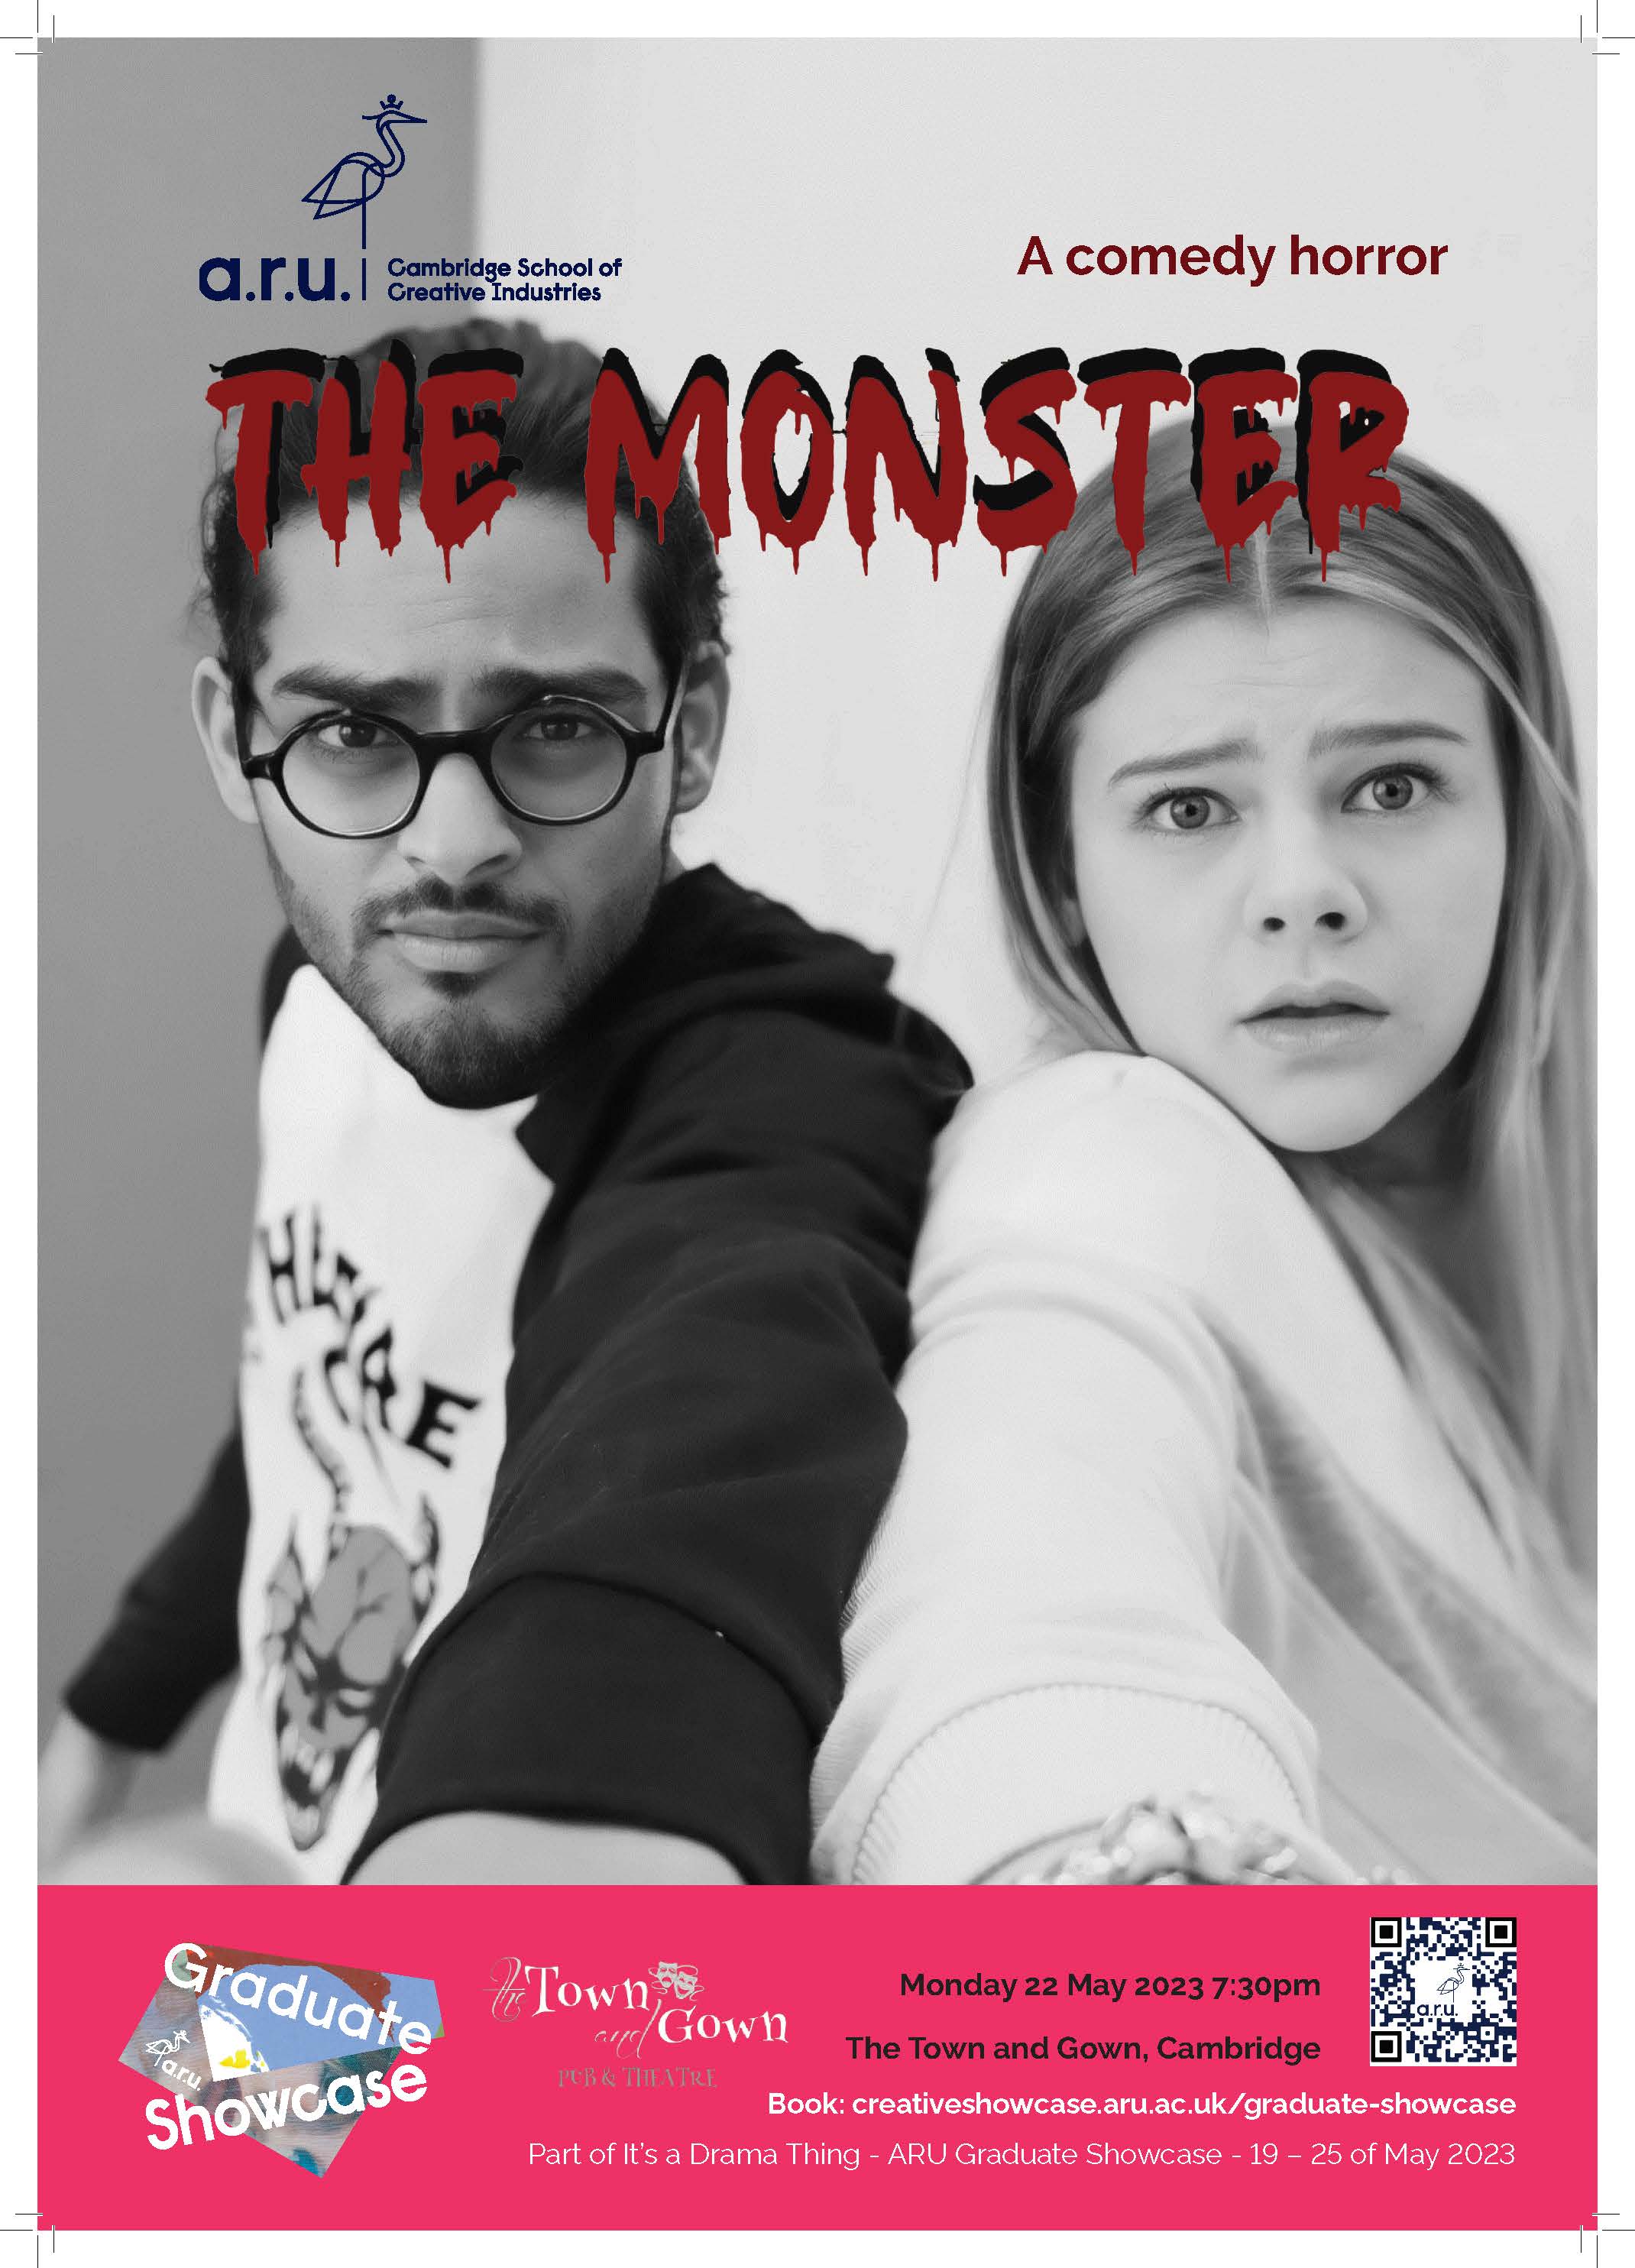 The Monster event poster.